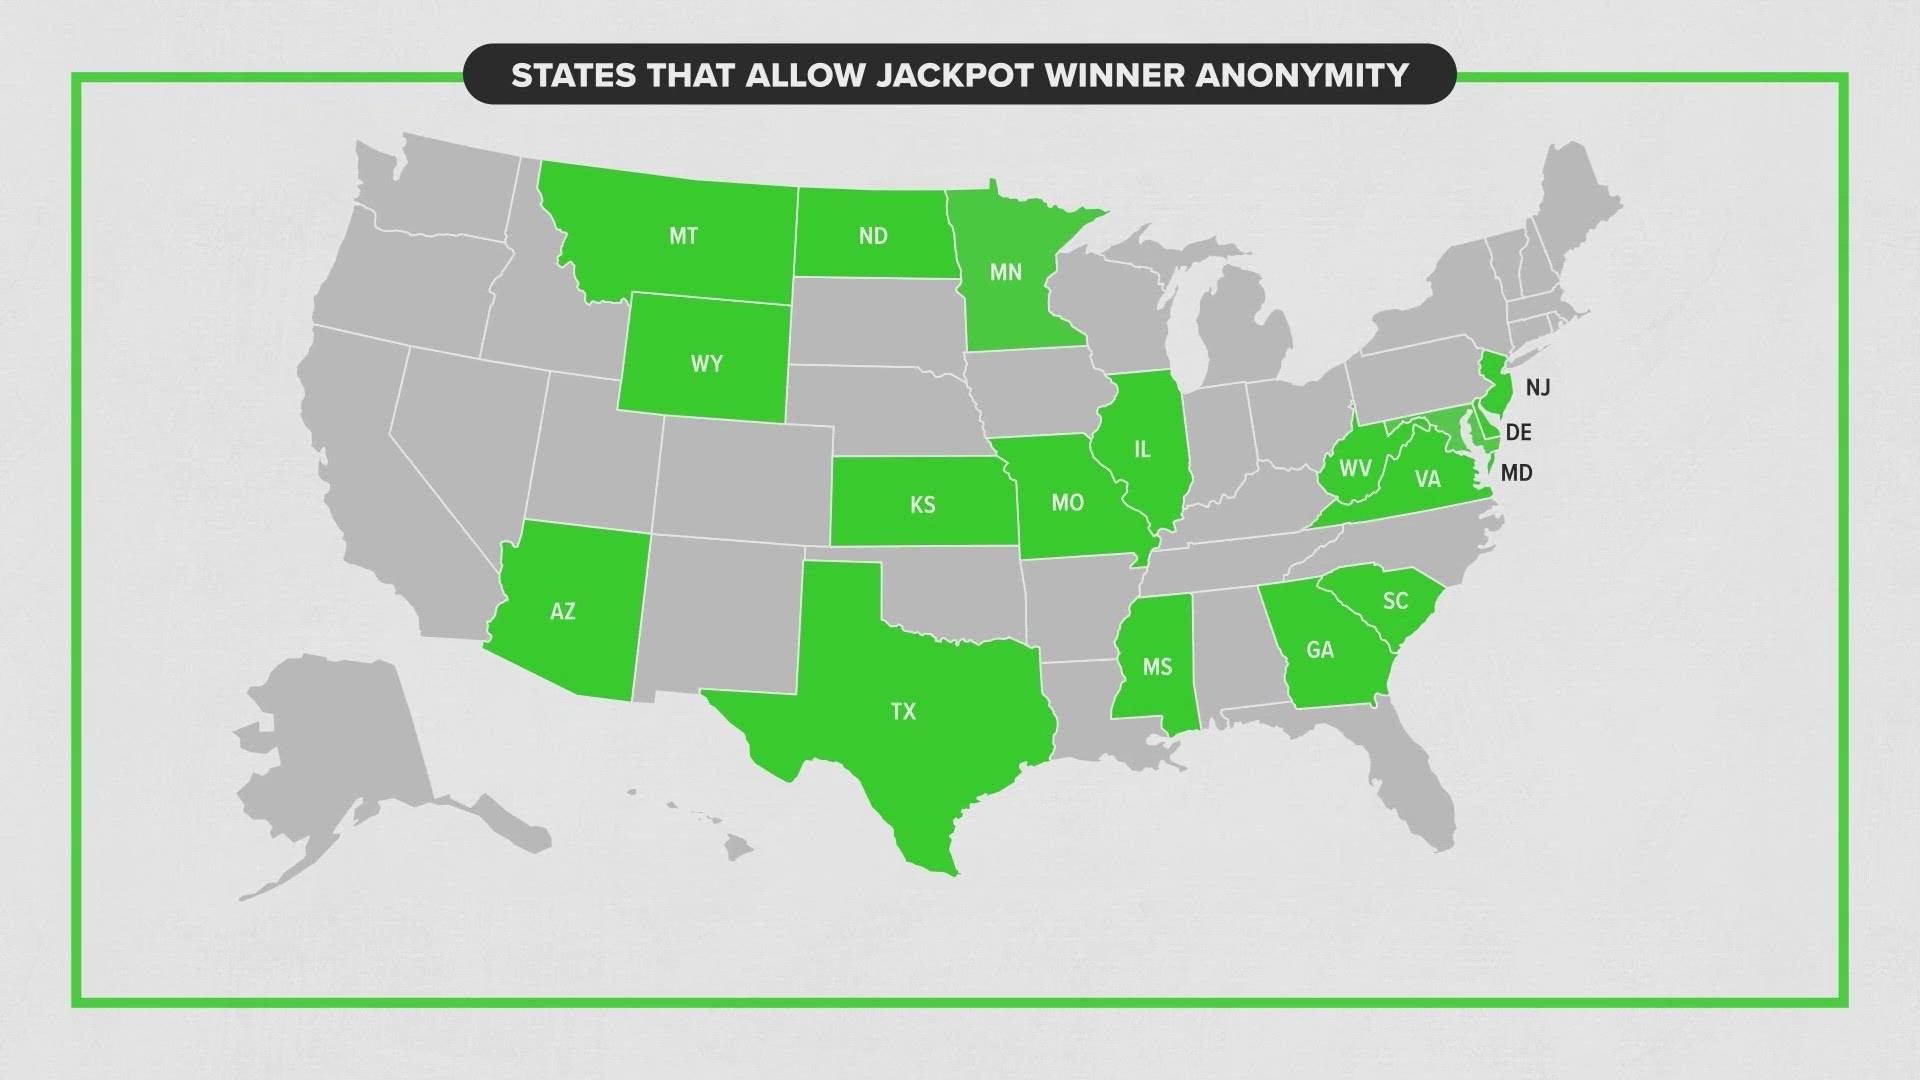 State laws determine the rules regarding anonymity for winners. Approximately 17 states allow you to not reveal your identity publicly.